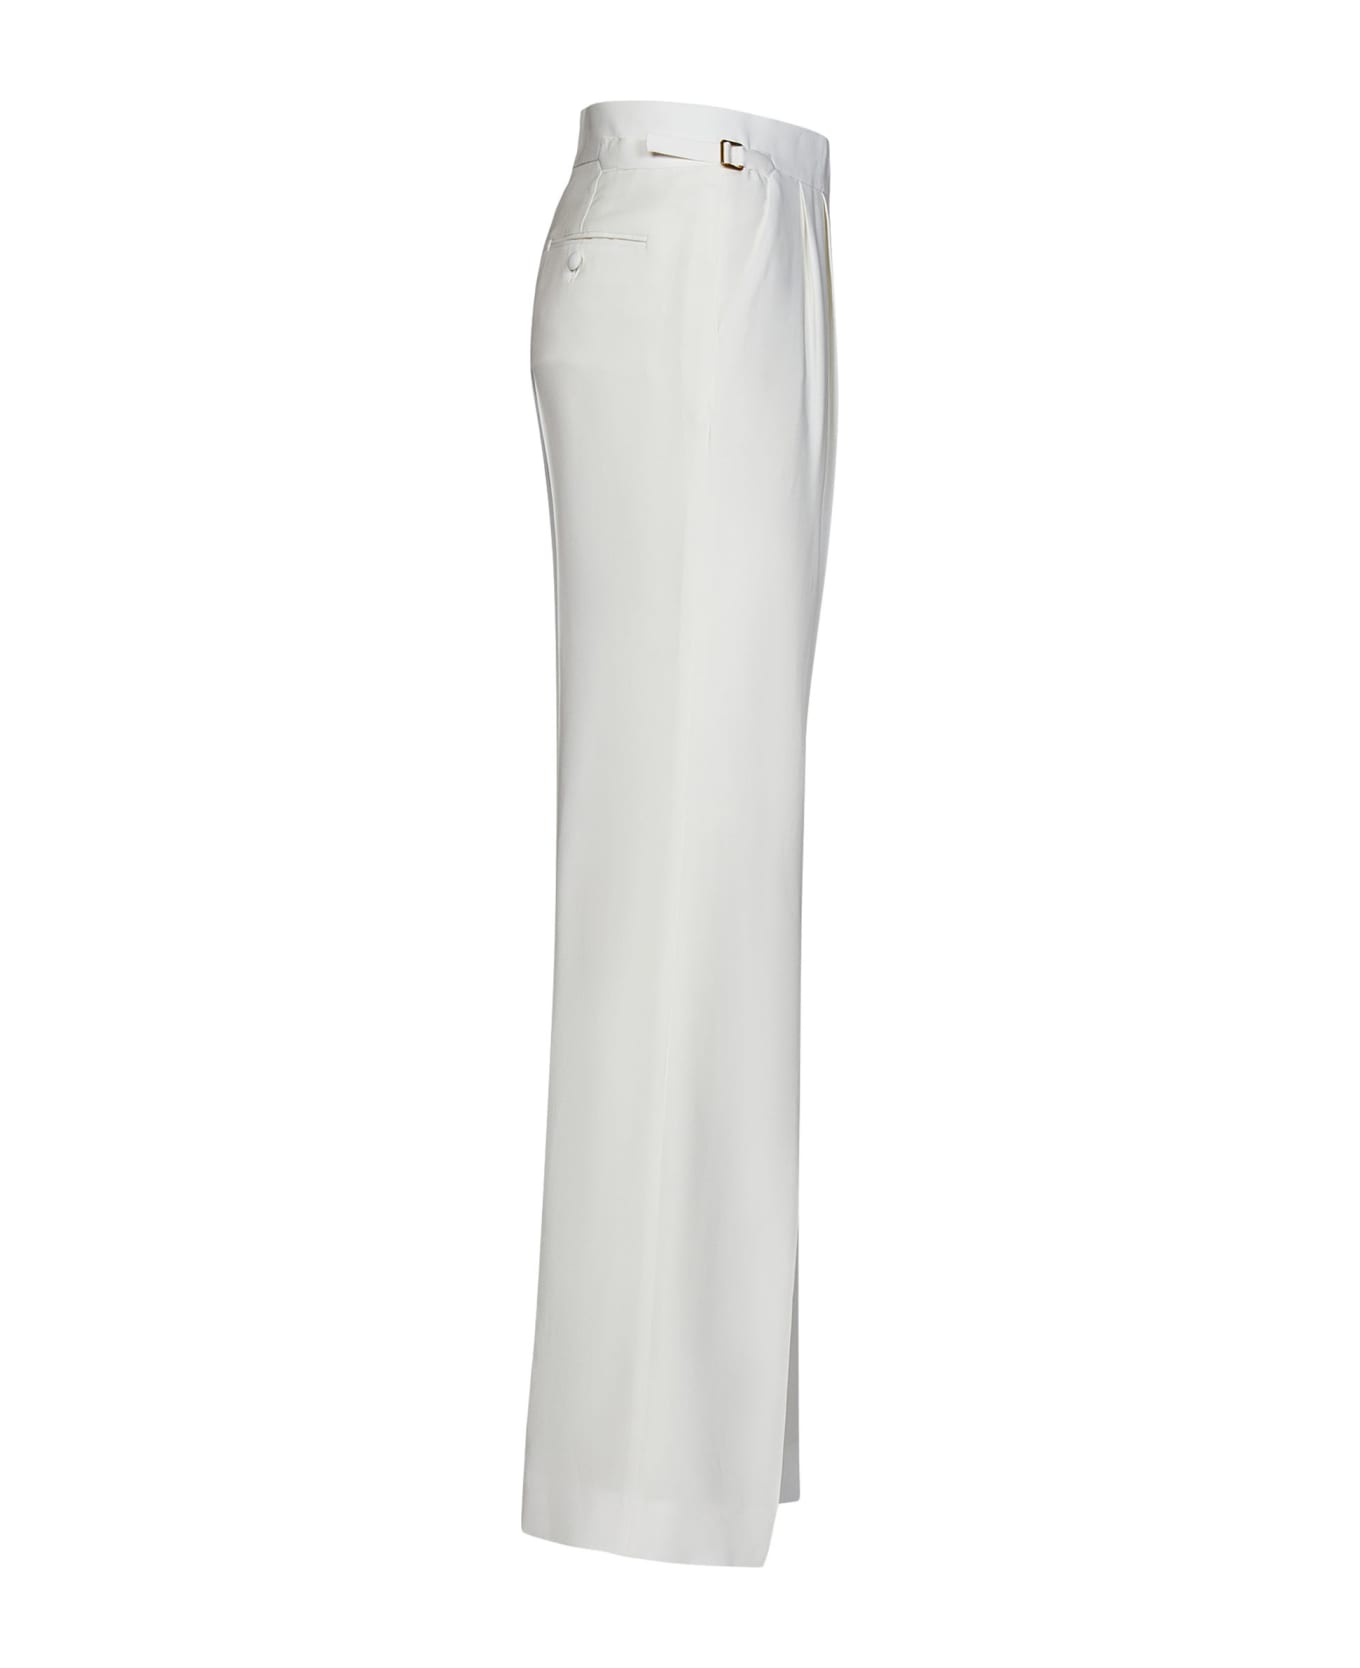 Tom Ford Trousers - WHITE